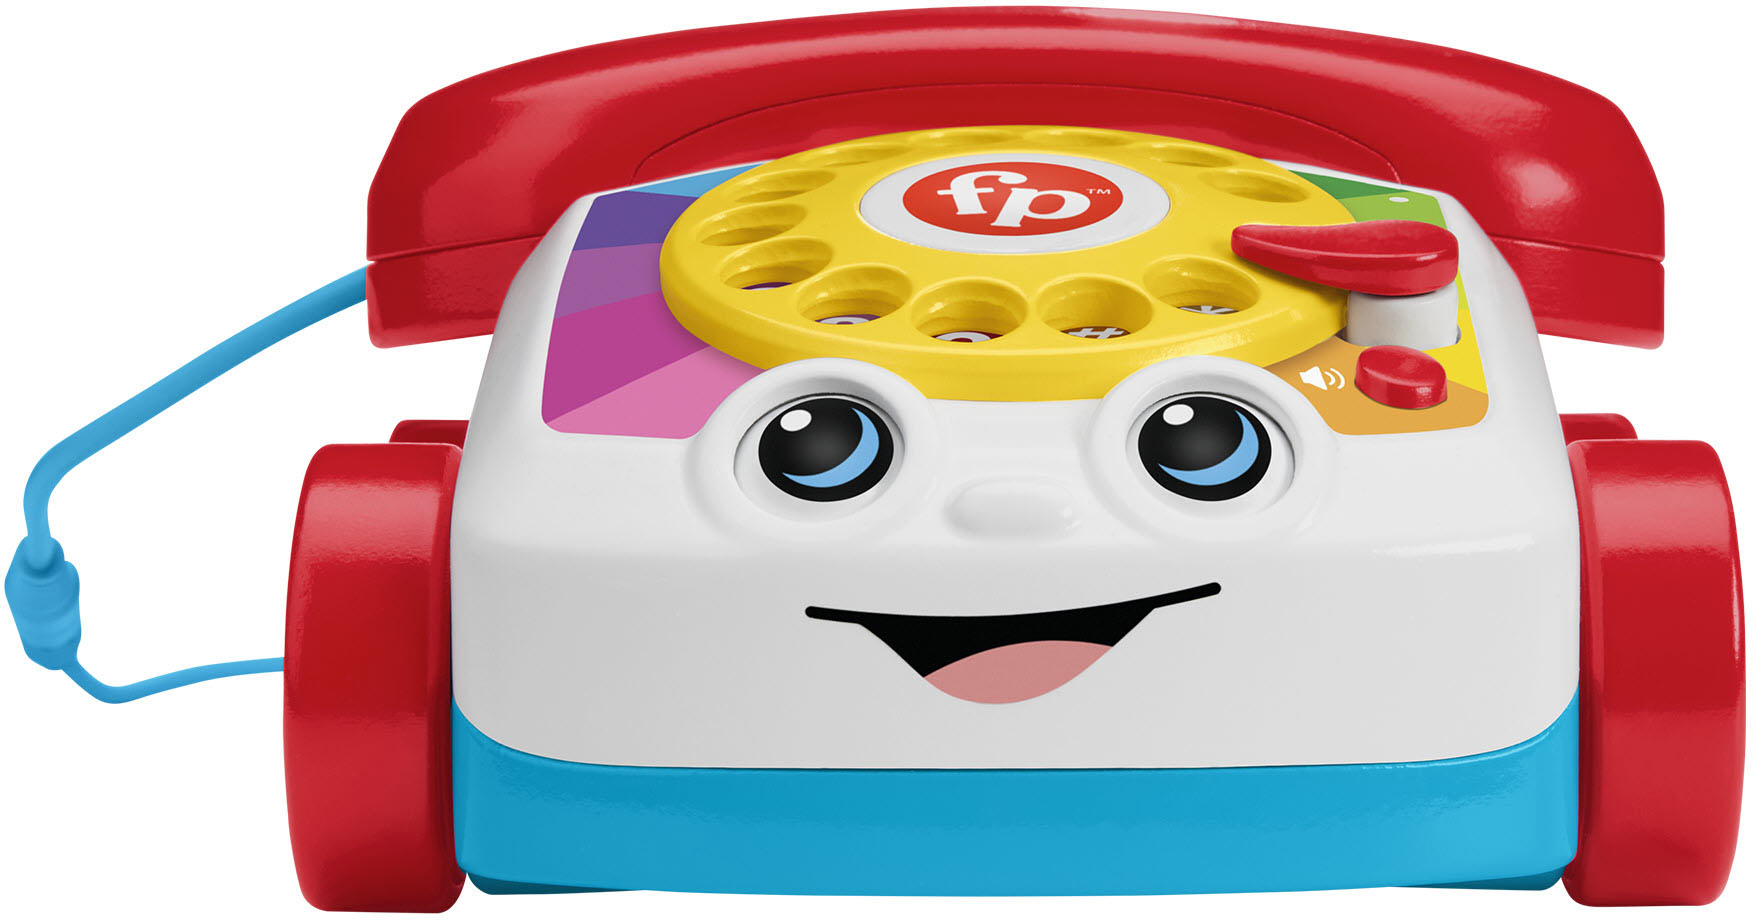 The Fisher-Price Chatter Telephone: Now powered by more than Imagination! –  Global Toy News